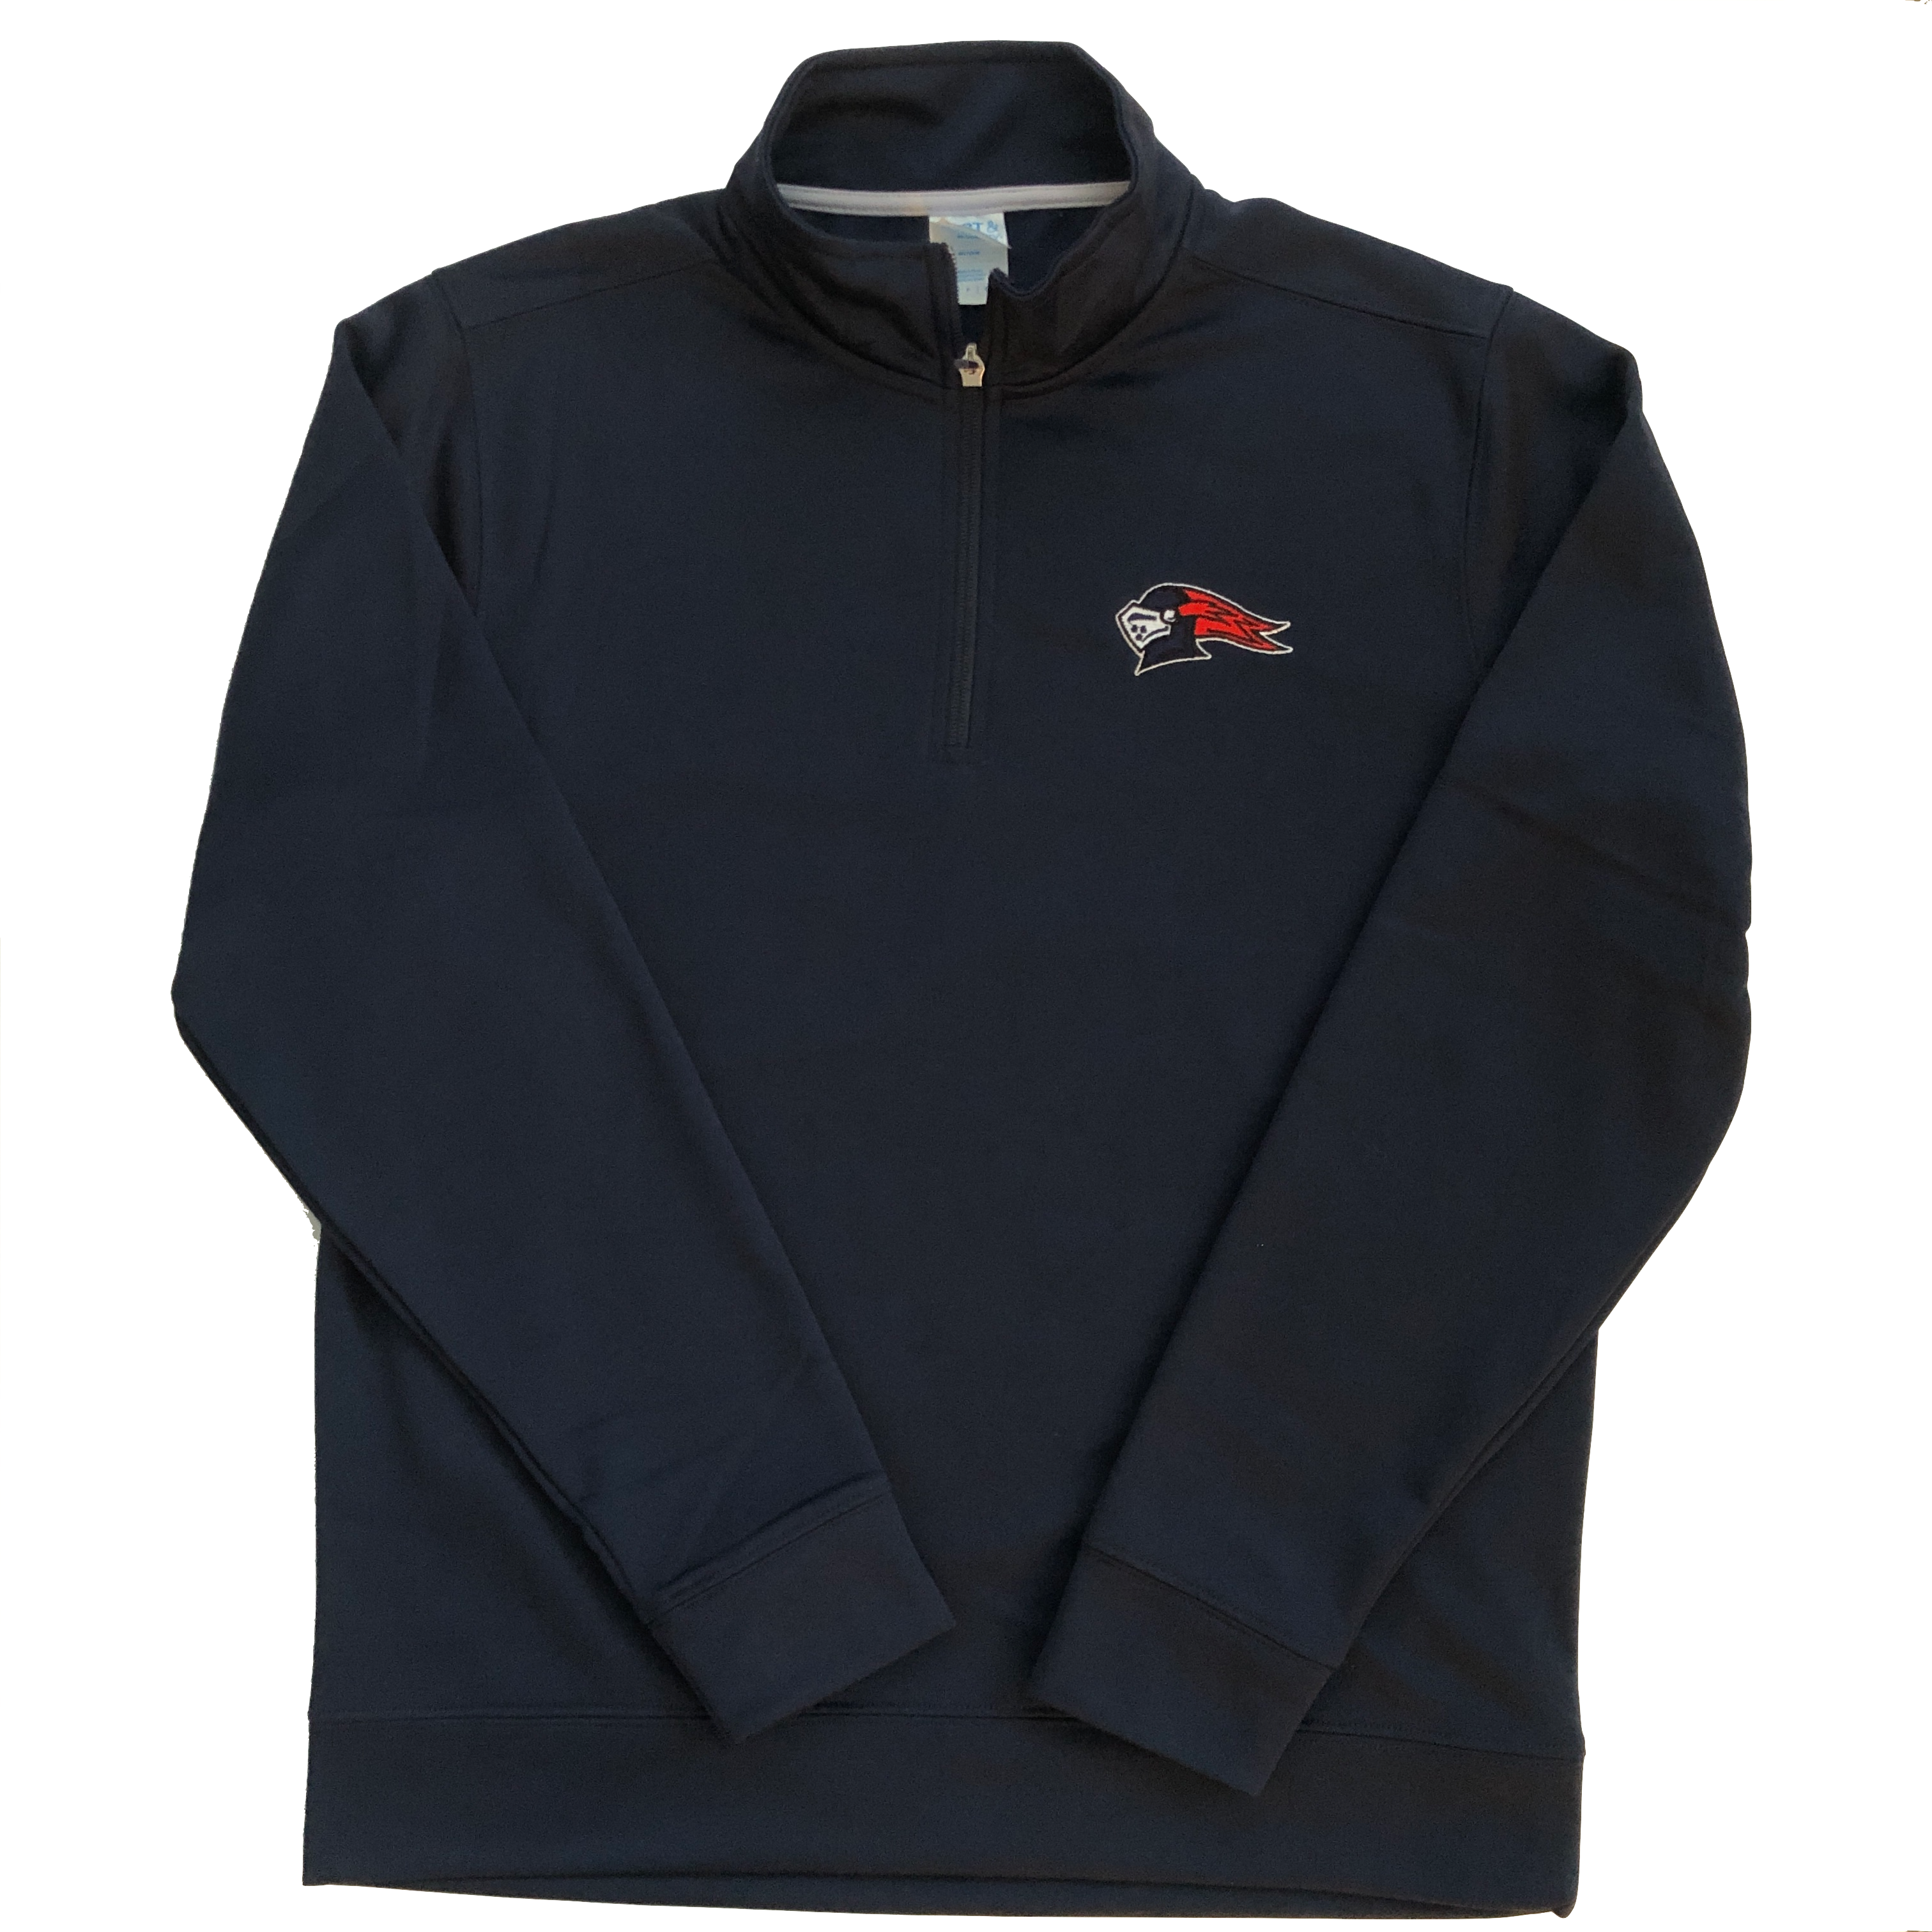 NEW Adult Navy Quarter Zip Performance Fleece Pullover with Knight Head